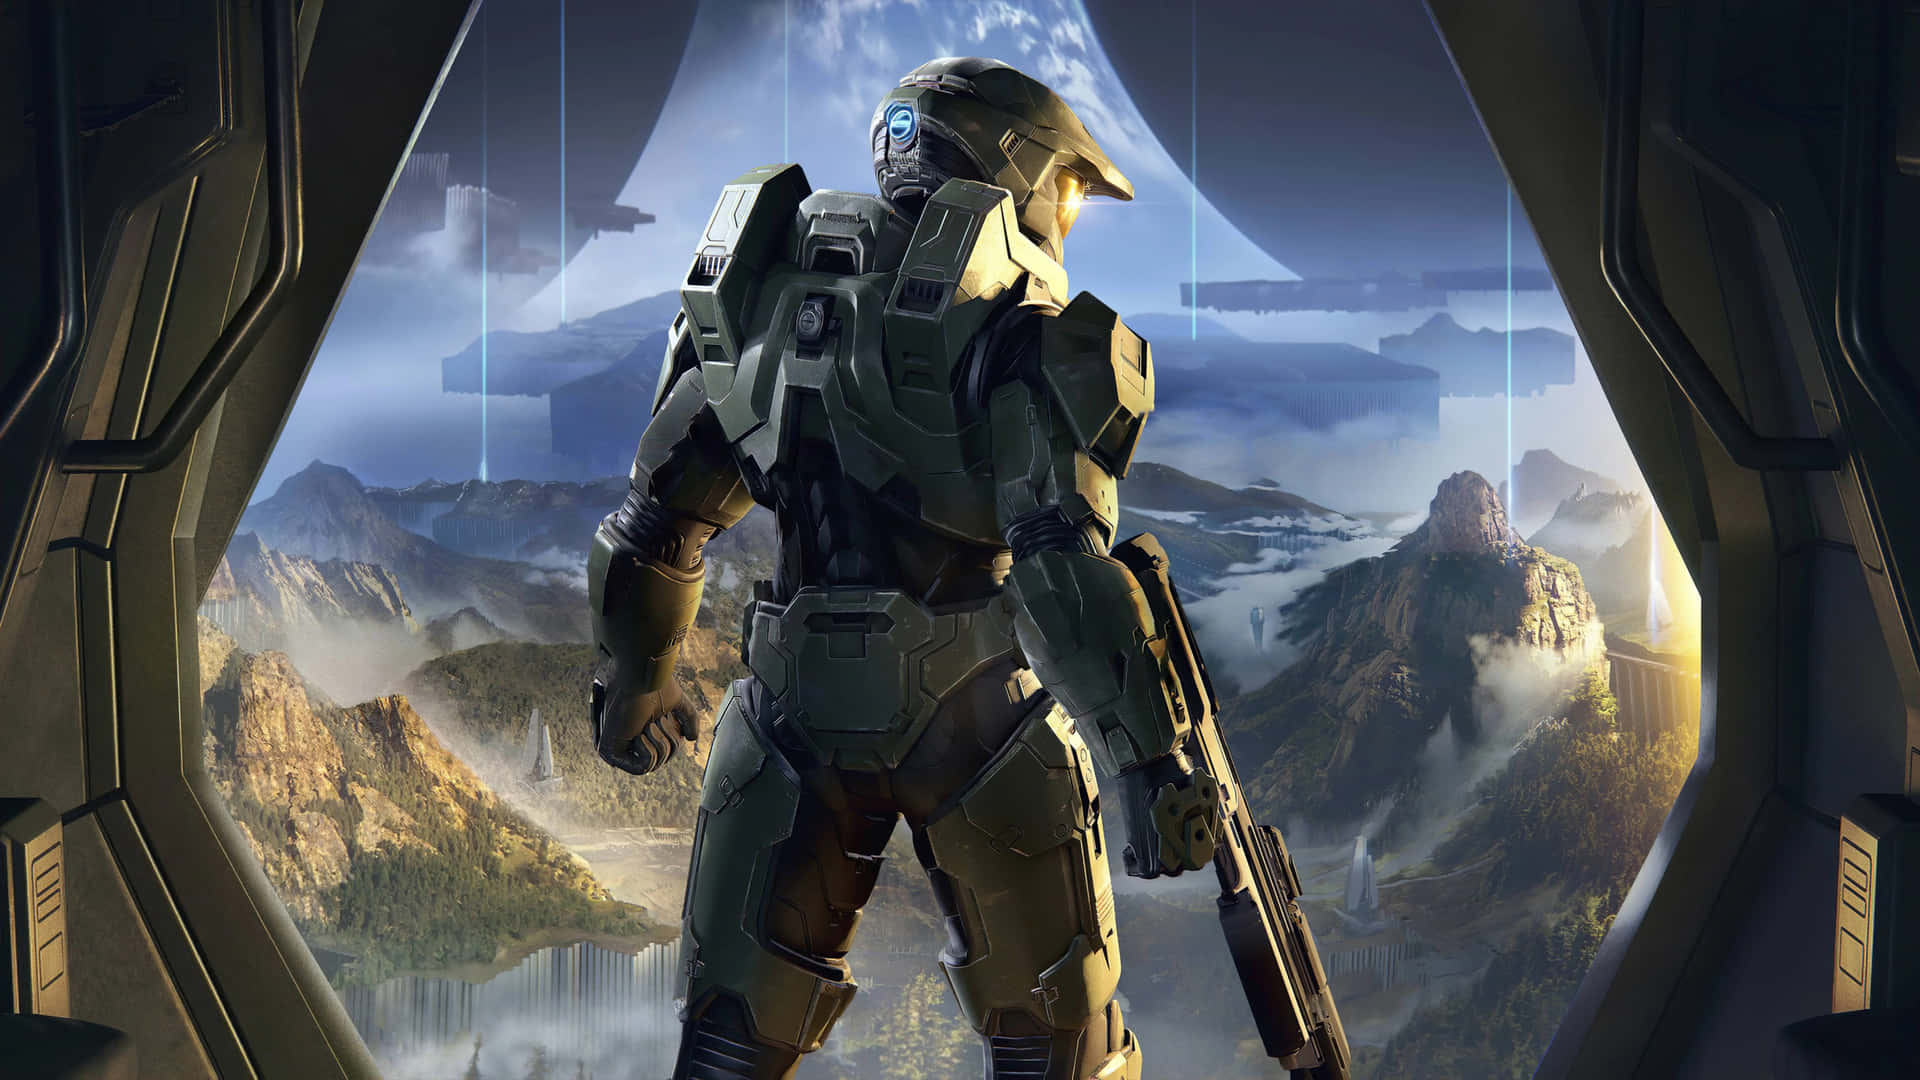 Master Chief fights the Covenant in a fight to the death